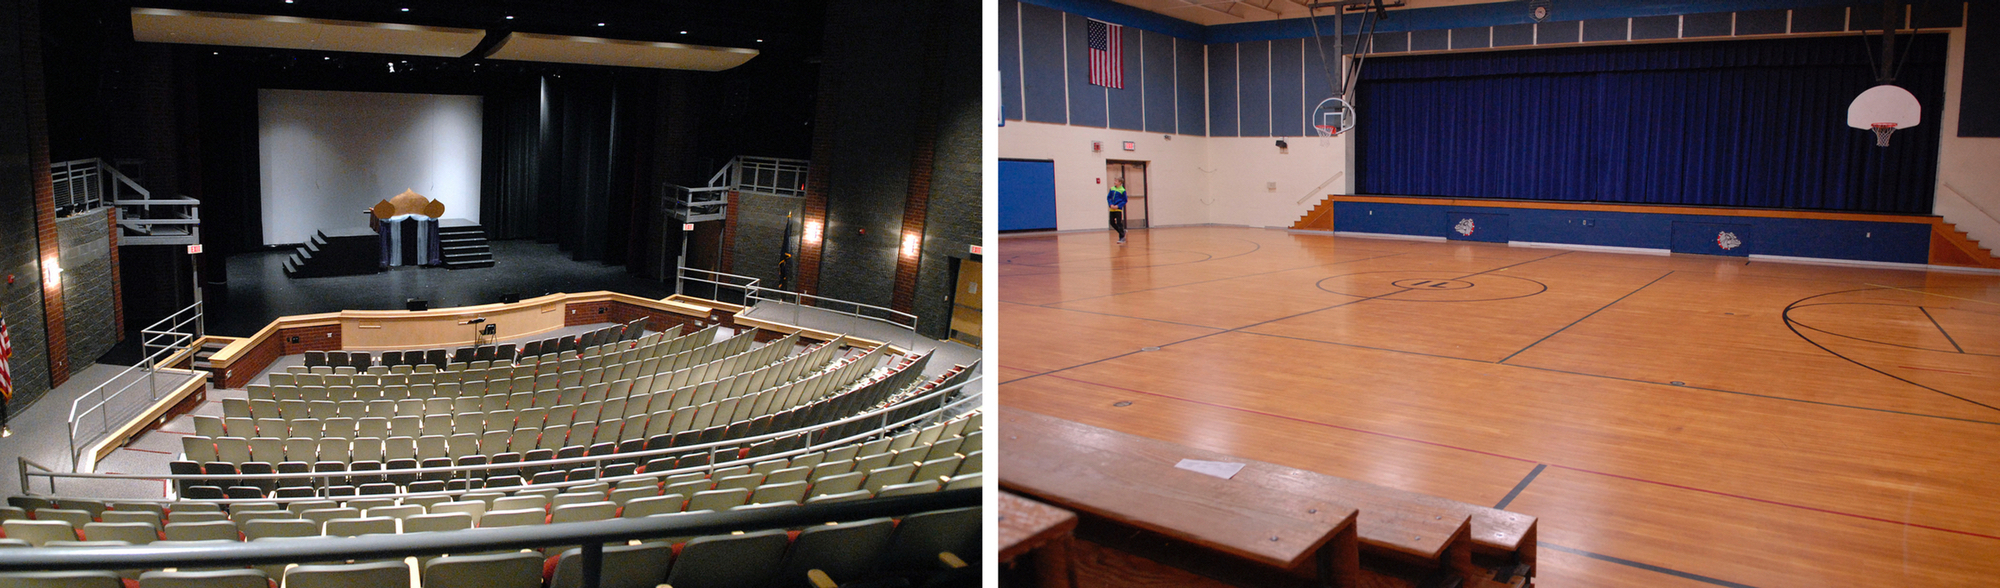 Harbor Springs High School boasts a state-of-art, 400-seat performing arts center, on left. About 20 miles east, Inland Lakes Schools uses a middle school gym, right, for the same purpose. Folding chairs are added for seating. (Bridge photos by John Russell)